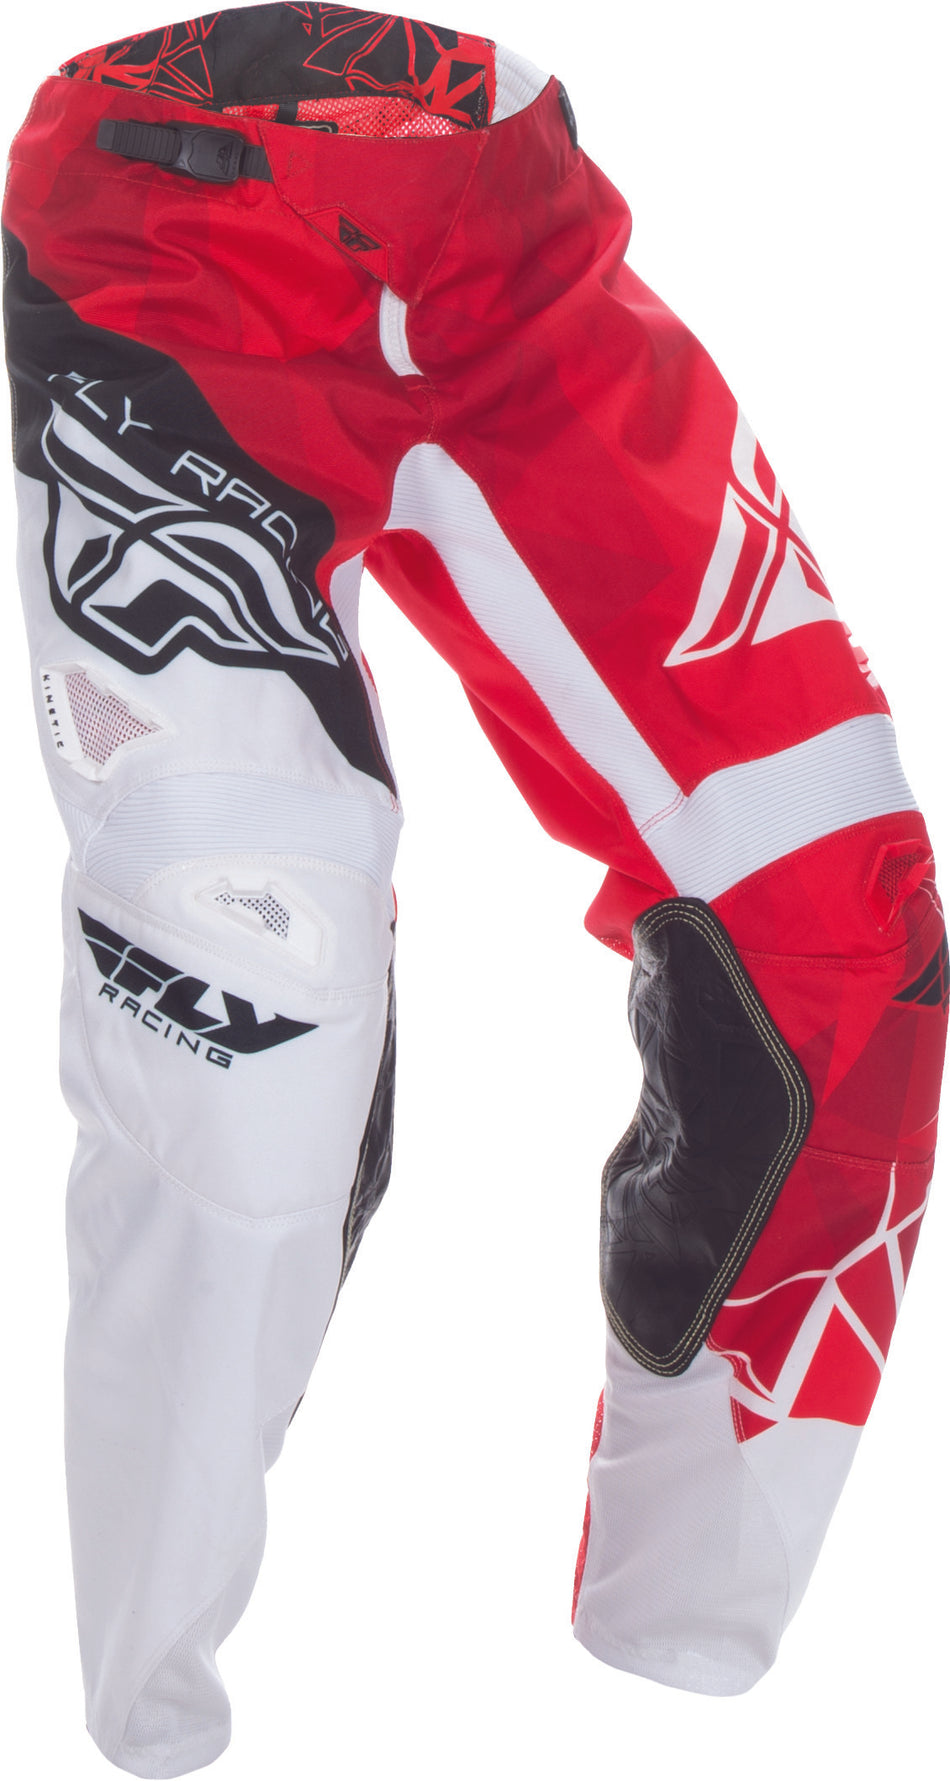 FLY RACING Kinetic Crux Pant Red/White Sz 28 370-53228